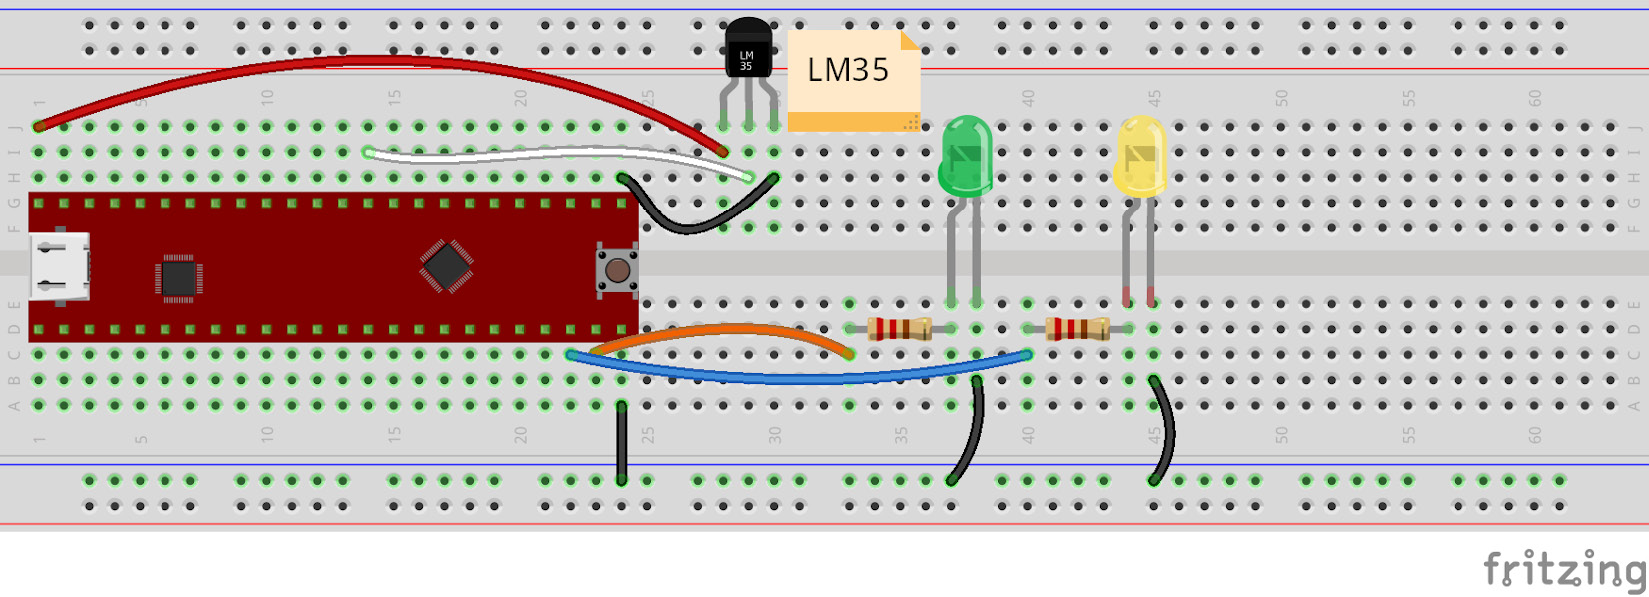 Figure 5.10 – Connecting the LM35 sensor and the LEDs to the Curiosity Nano board